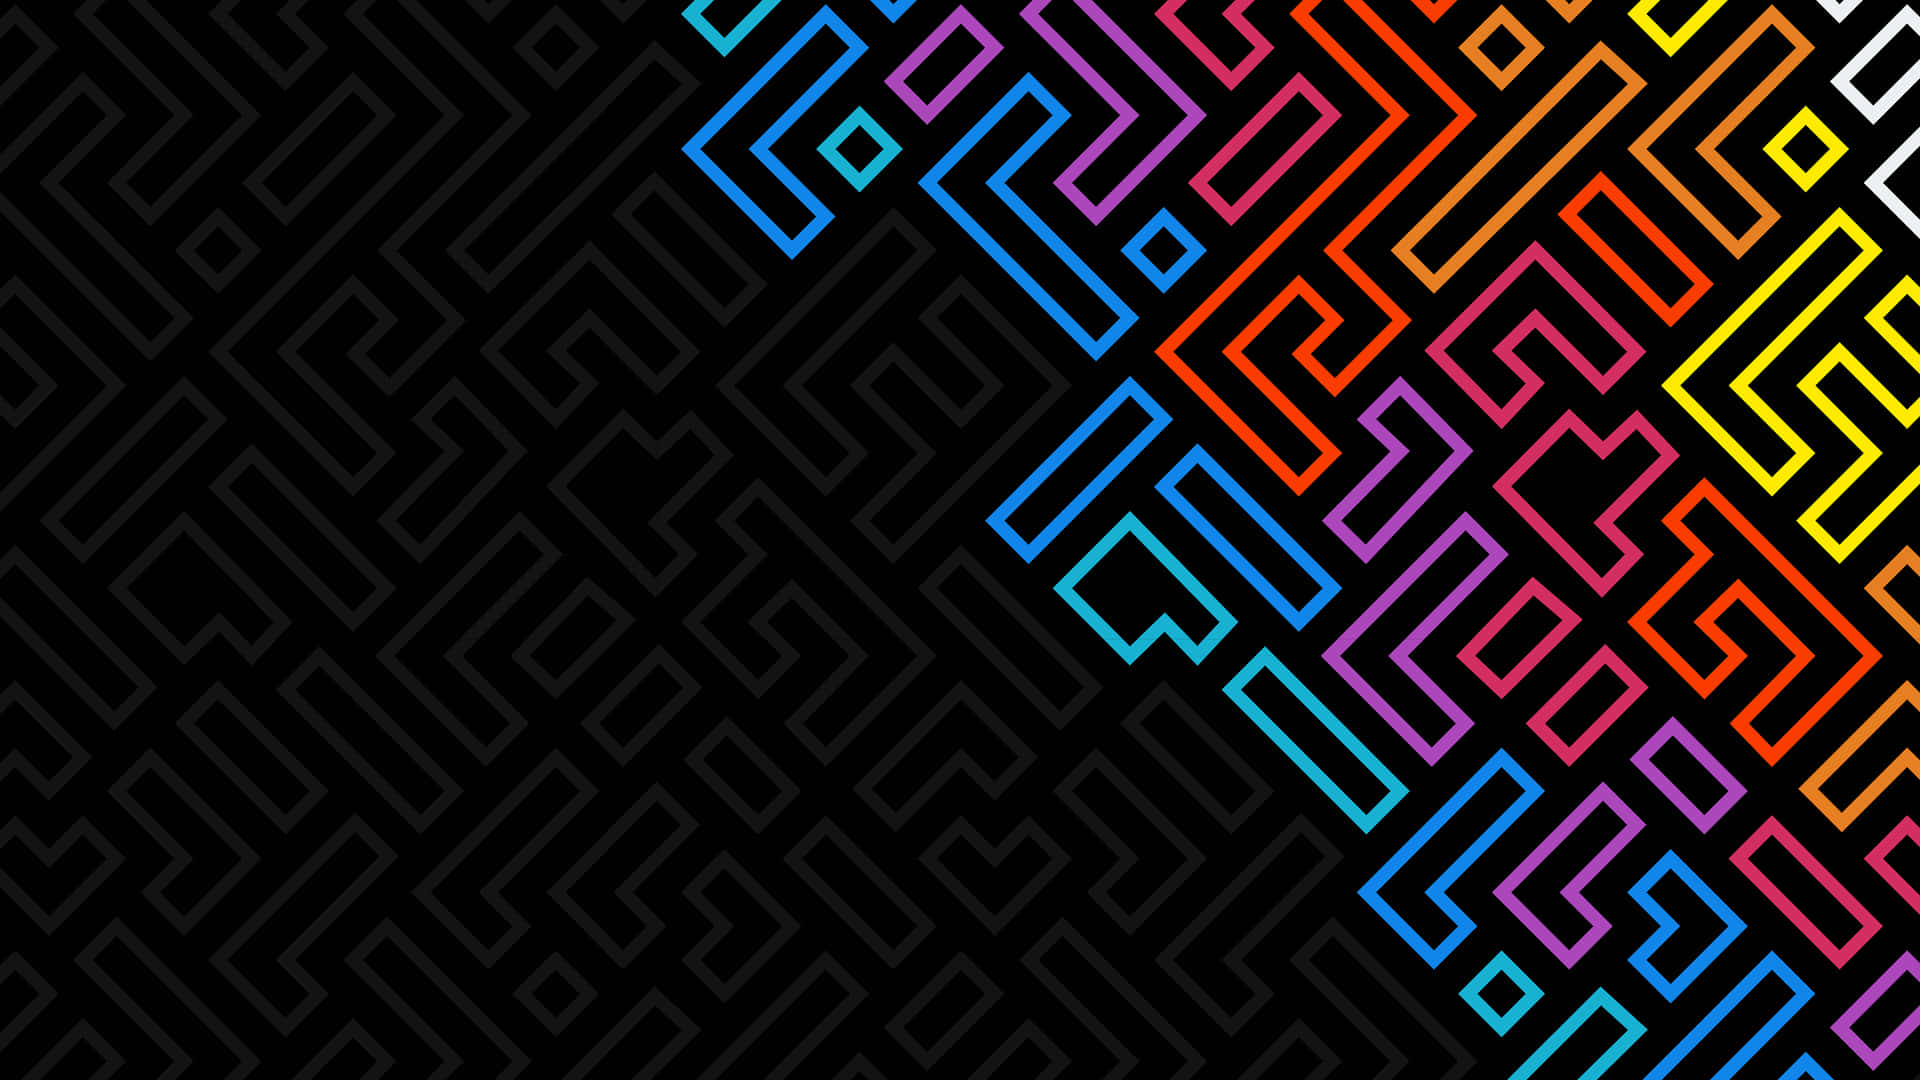 Customize the Pattern of Your Phone Wallpaper